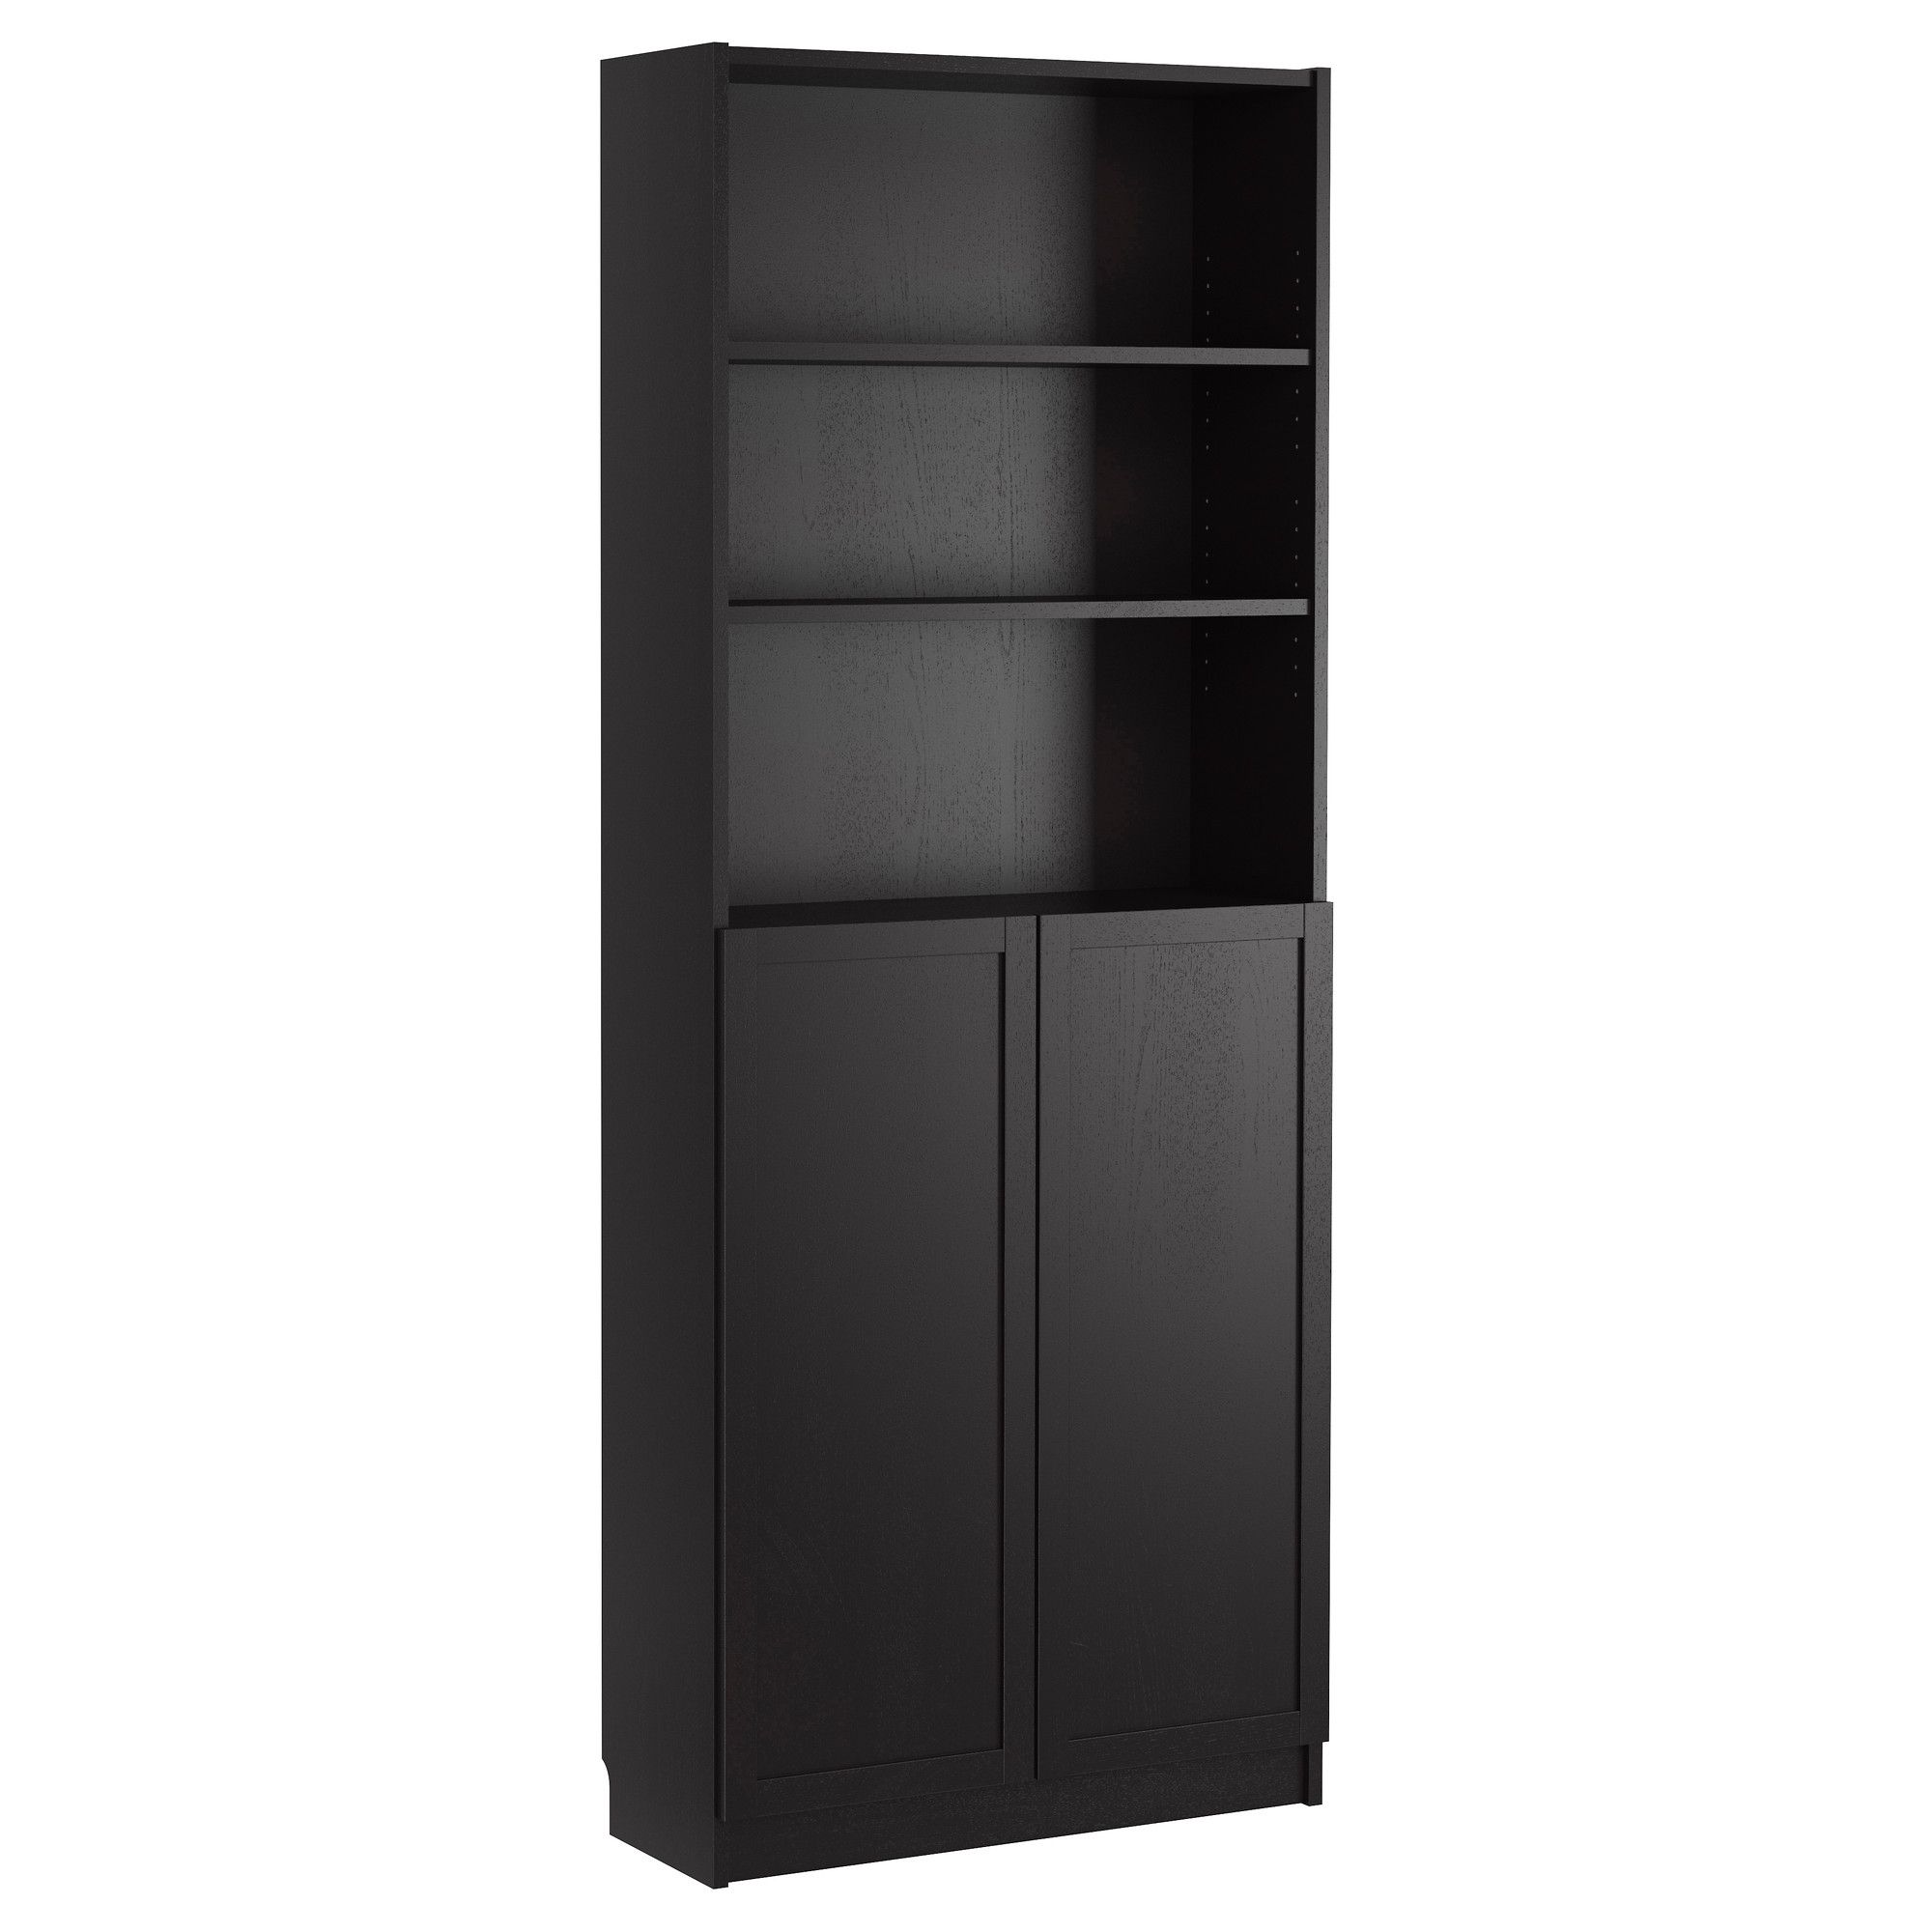 Famous Option For Bookcase Billy Bookcase With Doors – Black Brown – Ikea Pertaining To Black Bookcases With Doors (View 5 of 15)